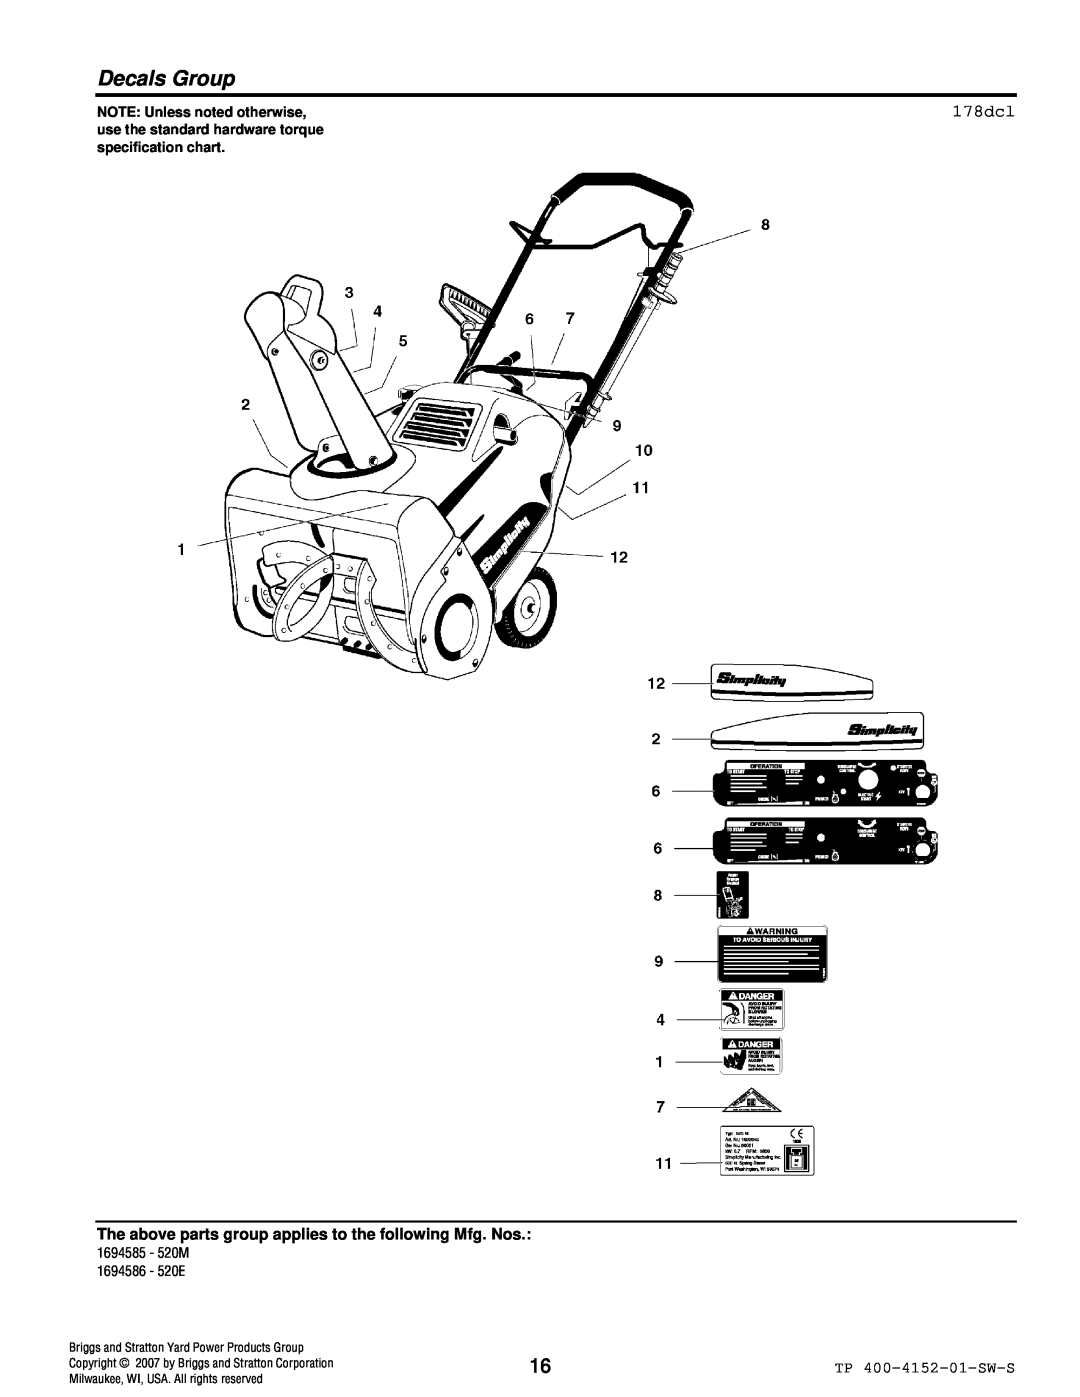 Simplicity 520 manual Decals Group, 178dcl, NOTE: Unless noted otherwise, Briggs and Stratton Yard Power Products Group 